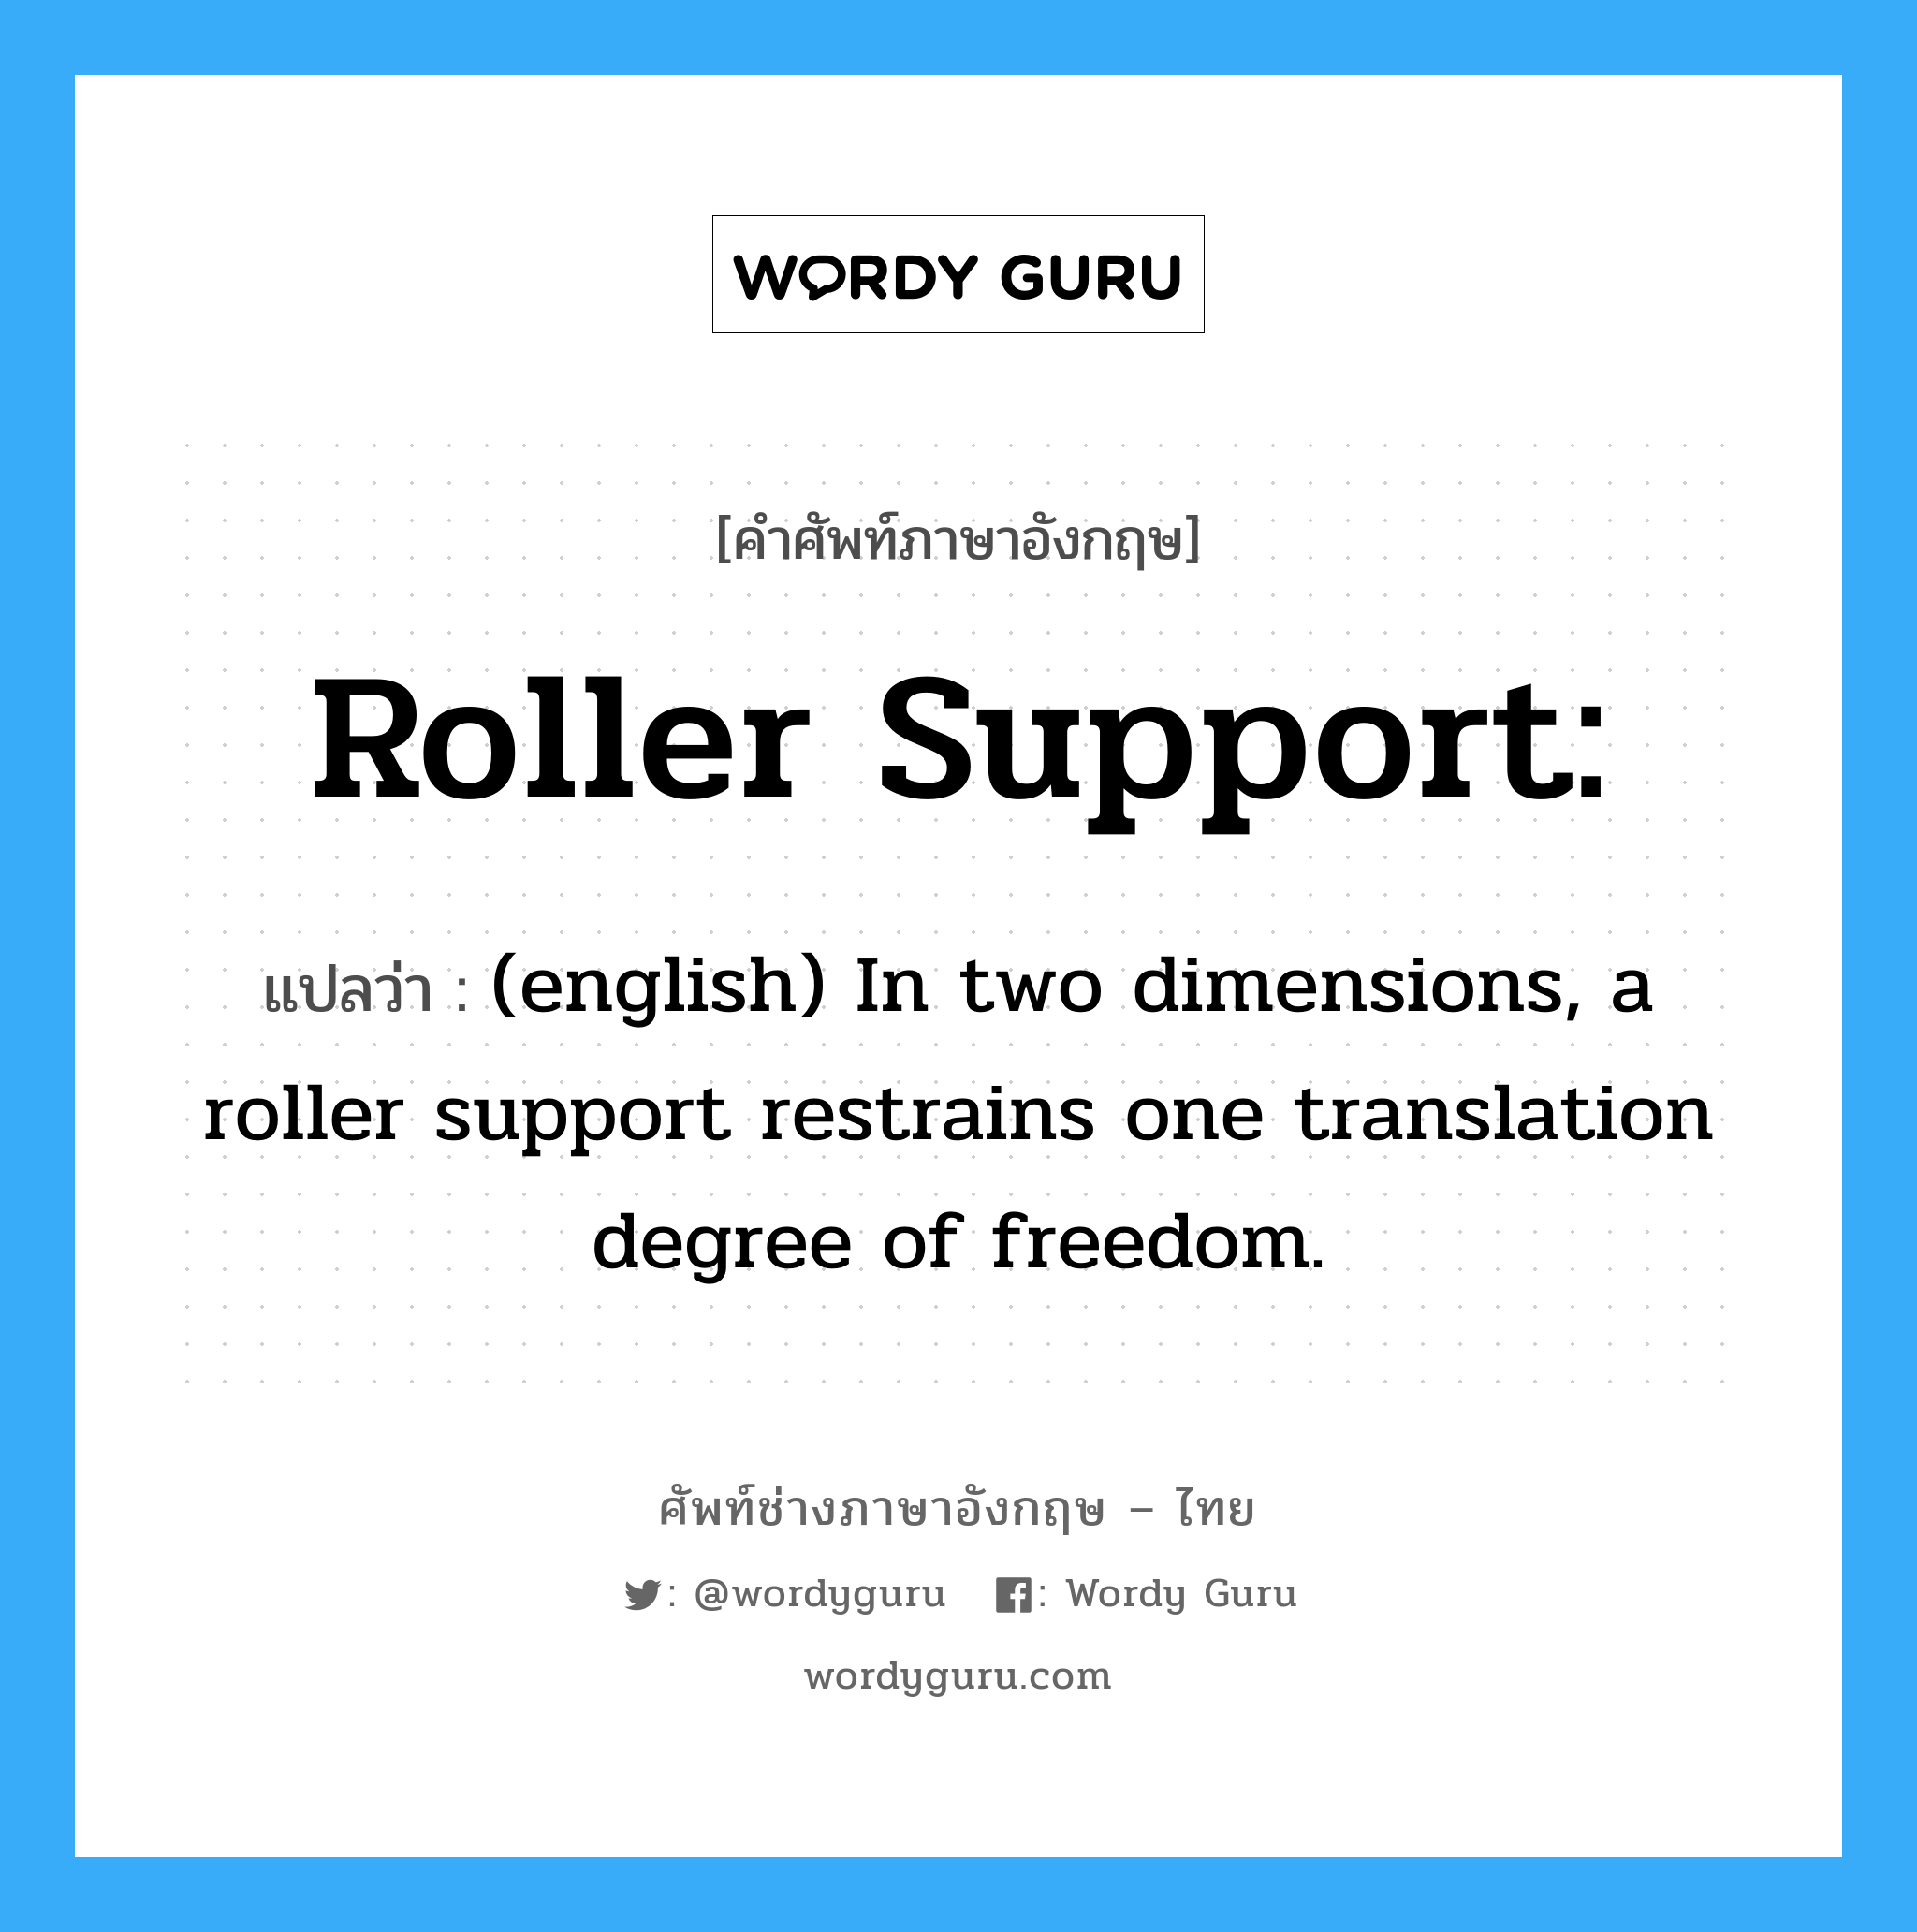 (english) In two dimensions, a roller support restrains one translation degree of freedom. ภาษาอังกฤษ?, คำศัพท์ช่างภาษาอังกฤษ - ไทย (english) In two dimensions, a roller support restrains one translation degree of freedom. คำศัพท์ภาษาอังกฤษ (english) In two dimensions, a roller support restrains one translation degree of freedom. แปลว่า Roller support: